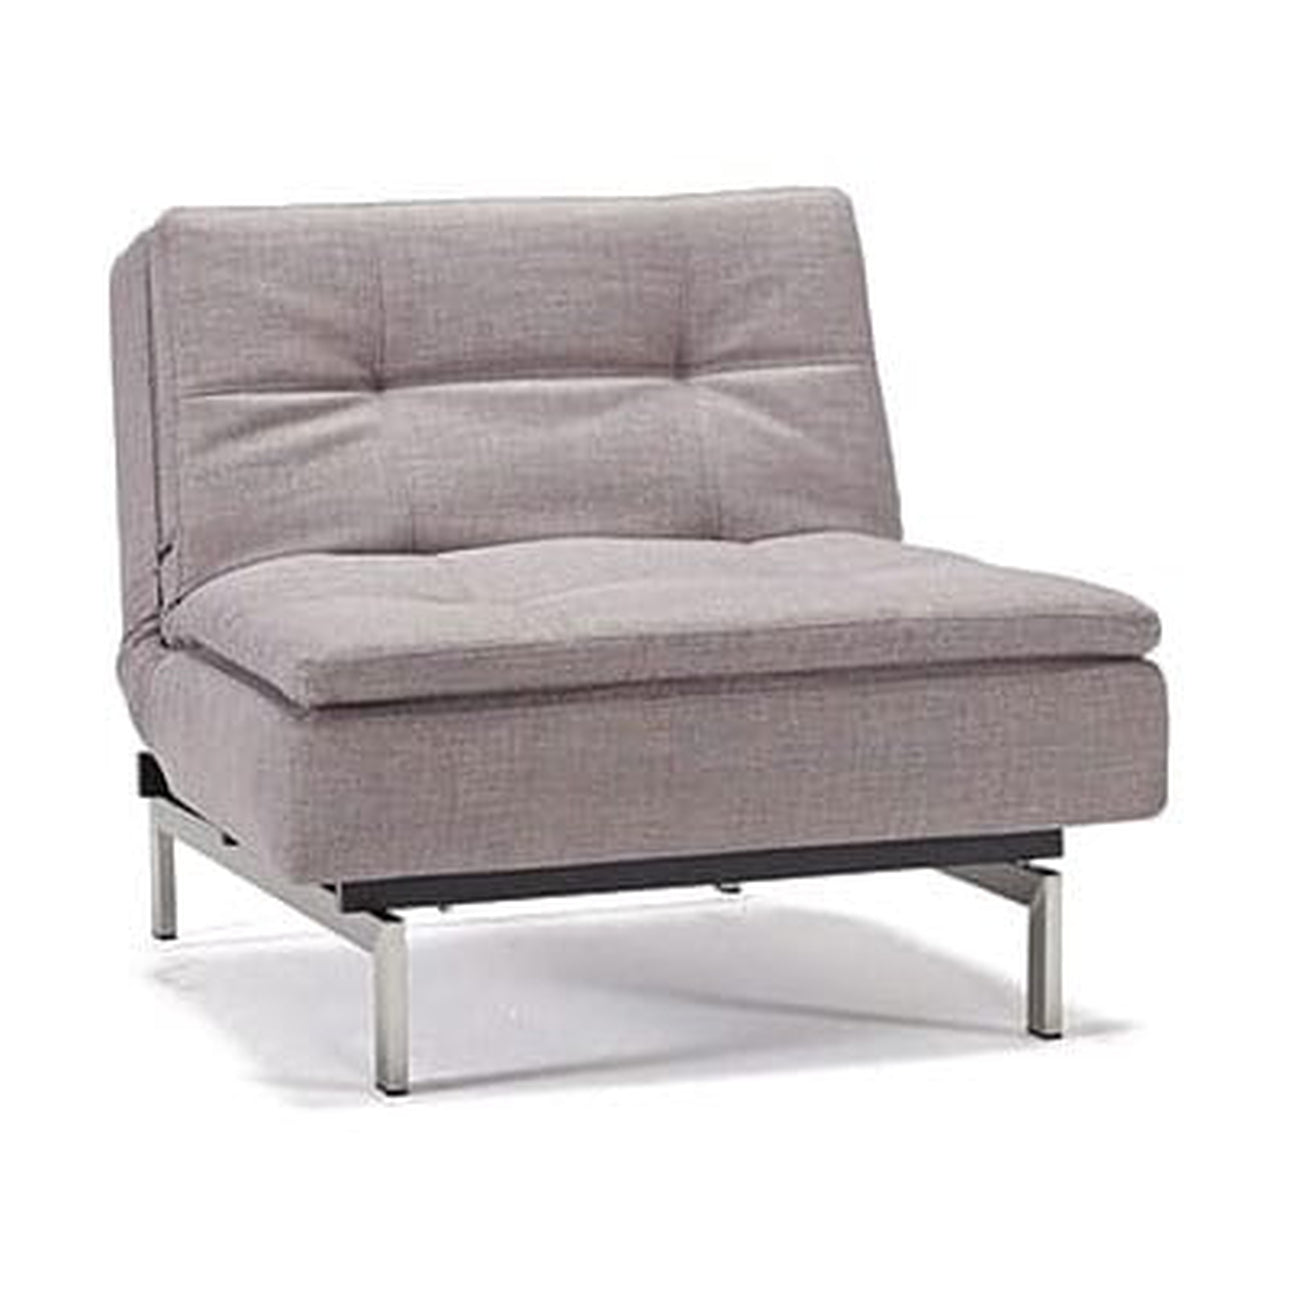 Dublexo Deluxe Chair,STAINLESS STEEL-Innovation Living-INNO-94-741051521-8-2-Lounge ChairsGrey-6-France and Son